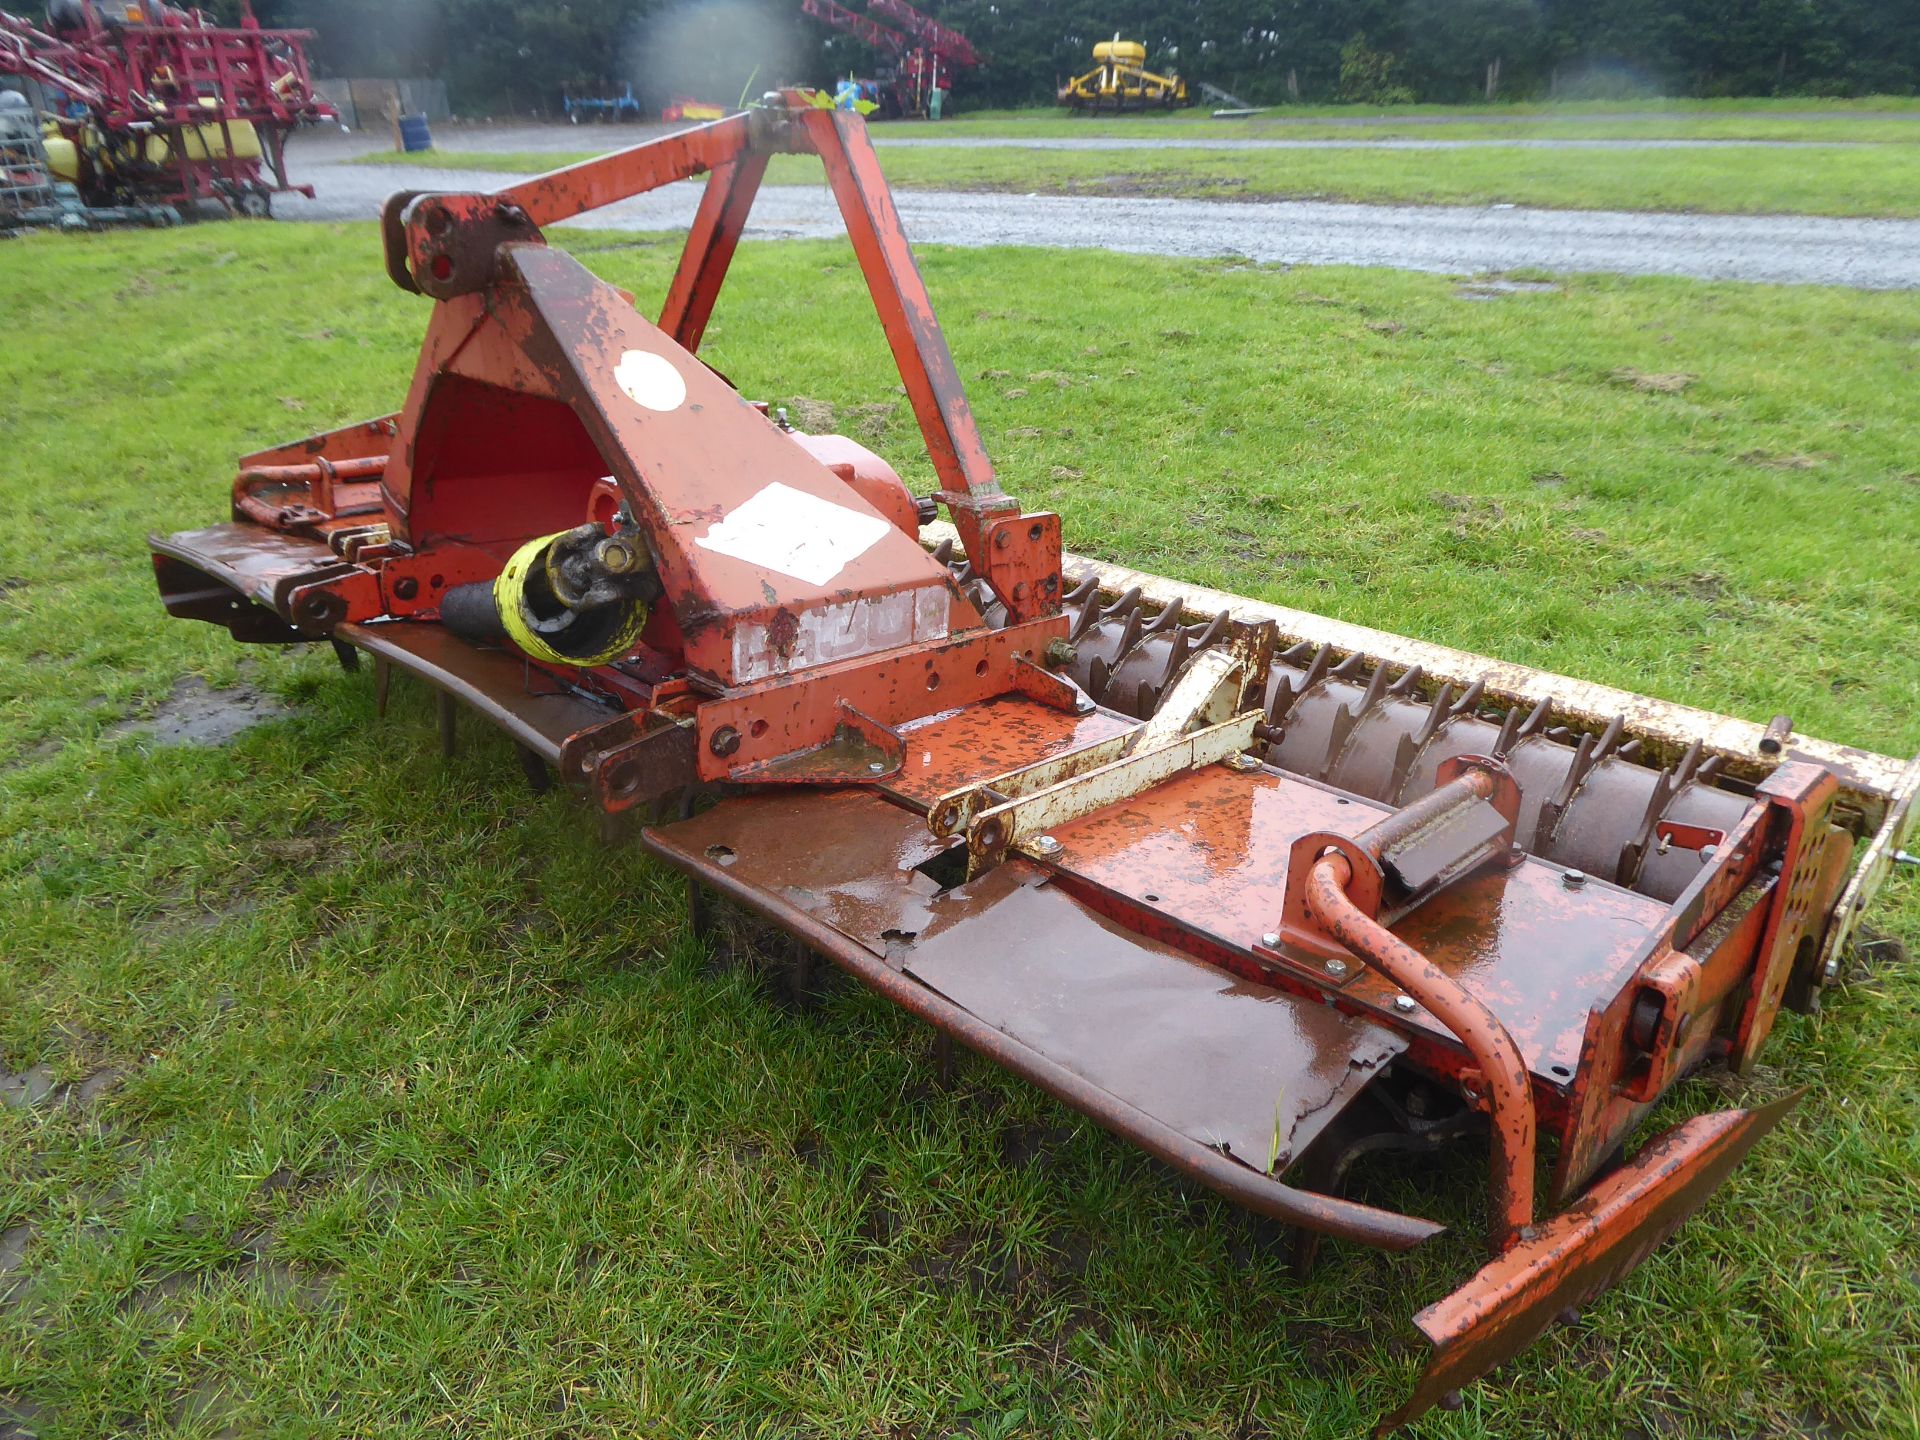 Kuhn 3m power harrow with packer roller - Image 2 of 3